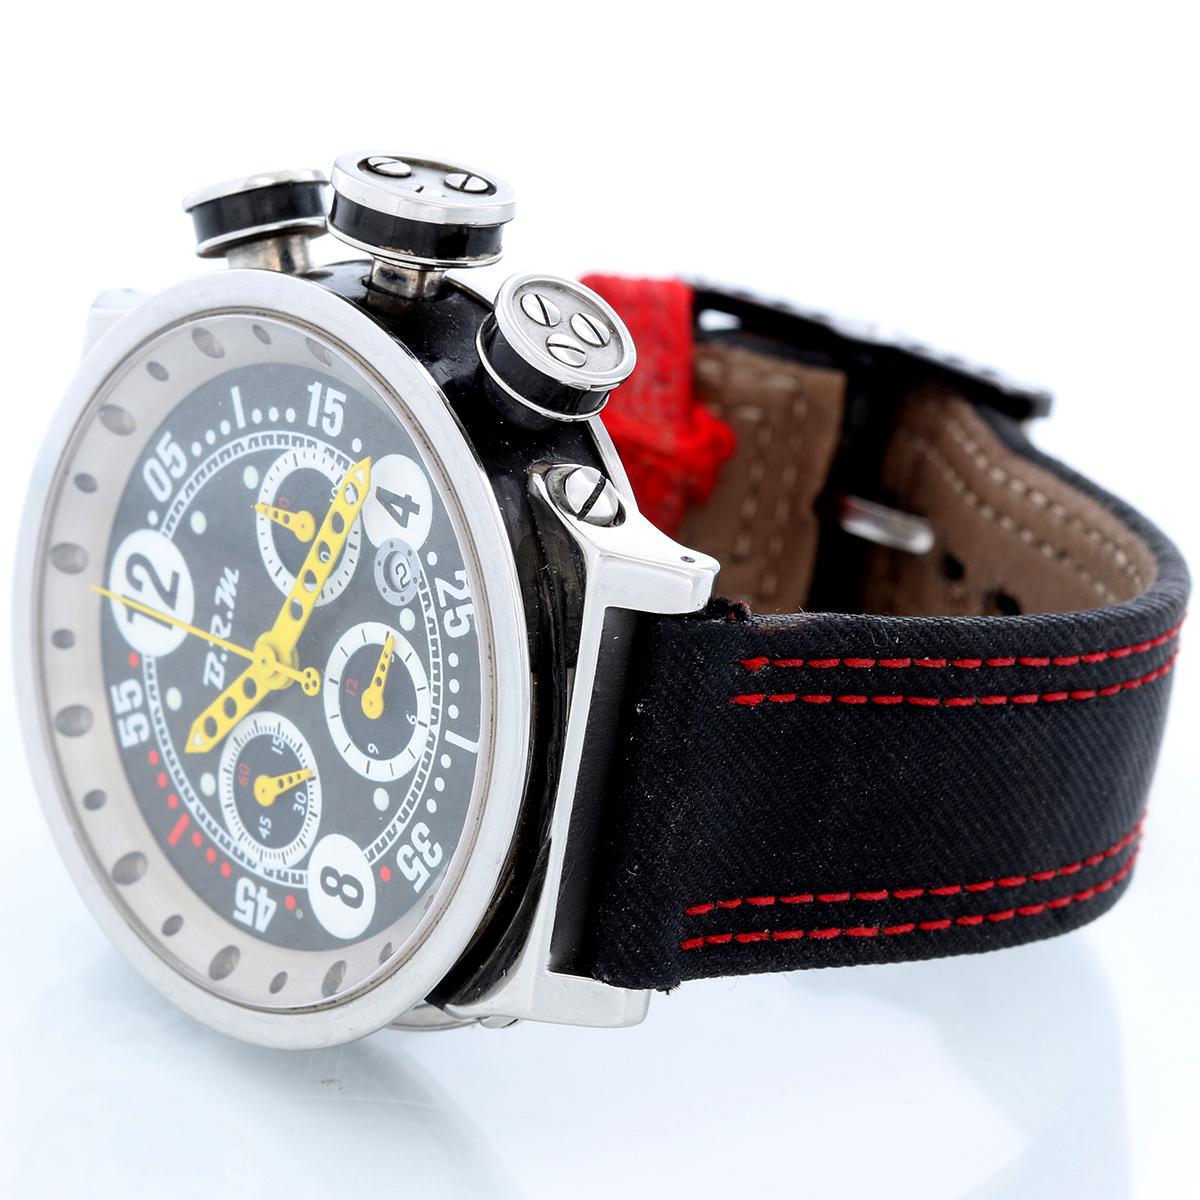 B.R.M. Ringmaster Men's Automatic Watch Ref V16-46-AJ - Automatic winding. Titanium ( 46 MM). Black dial with yellow hands; Hours, Minutes, Seconds, Chronograph. Black B.R.M. strap with red leather stitching . Pre-owned with BRM with box and books.